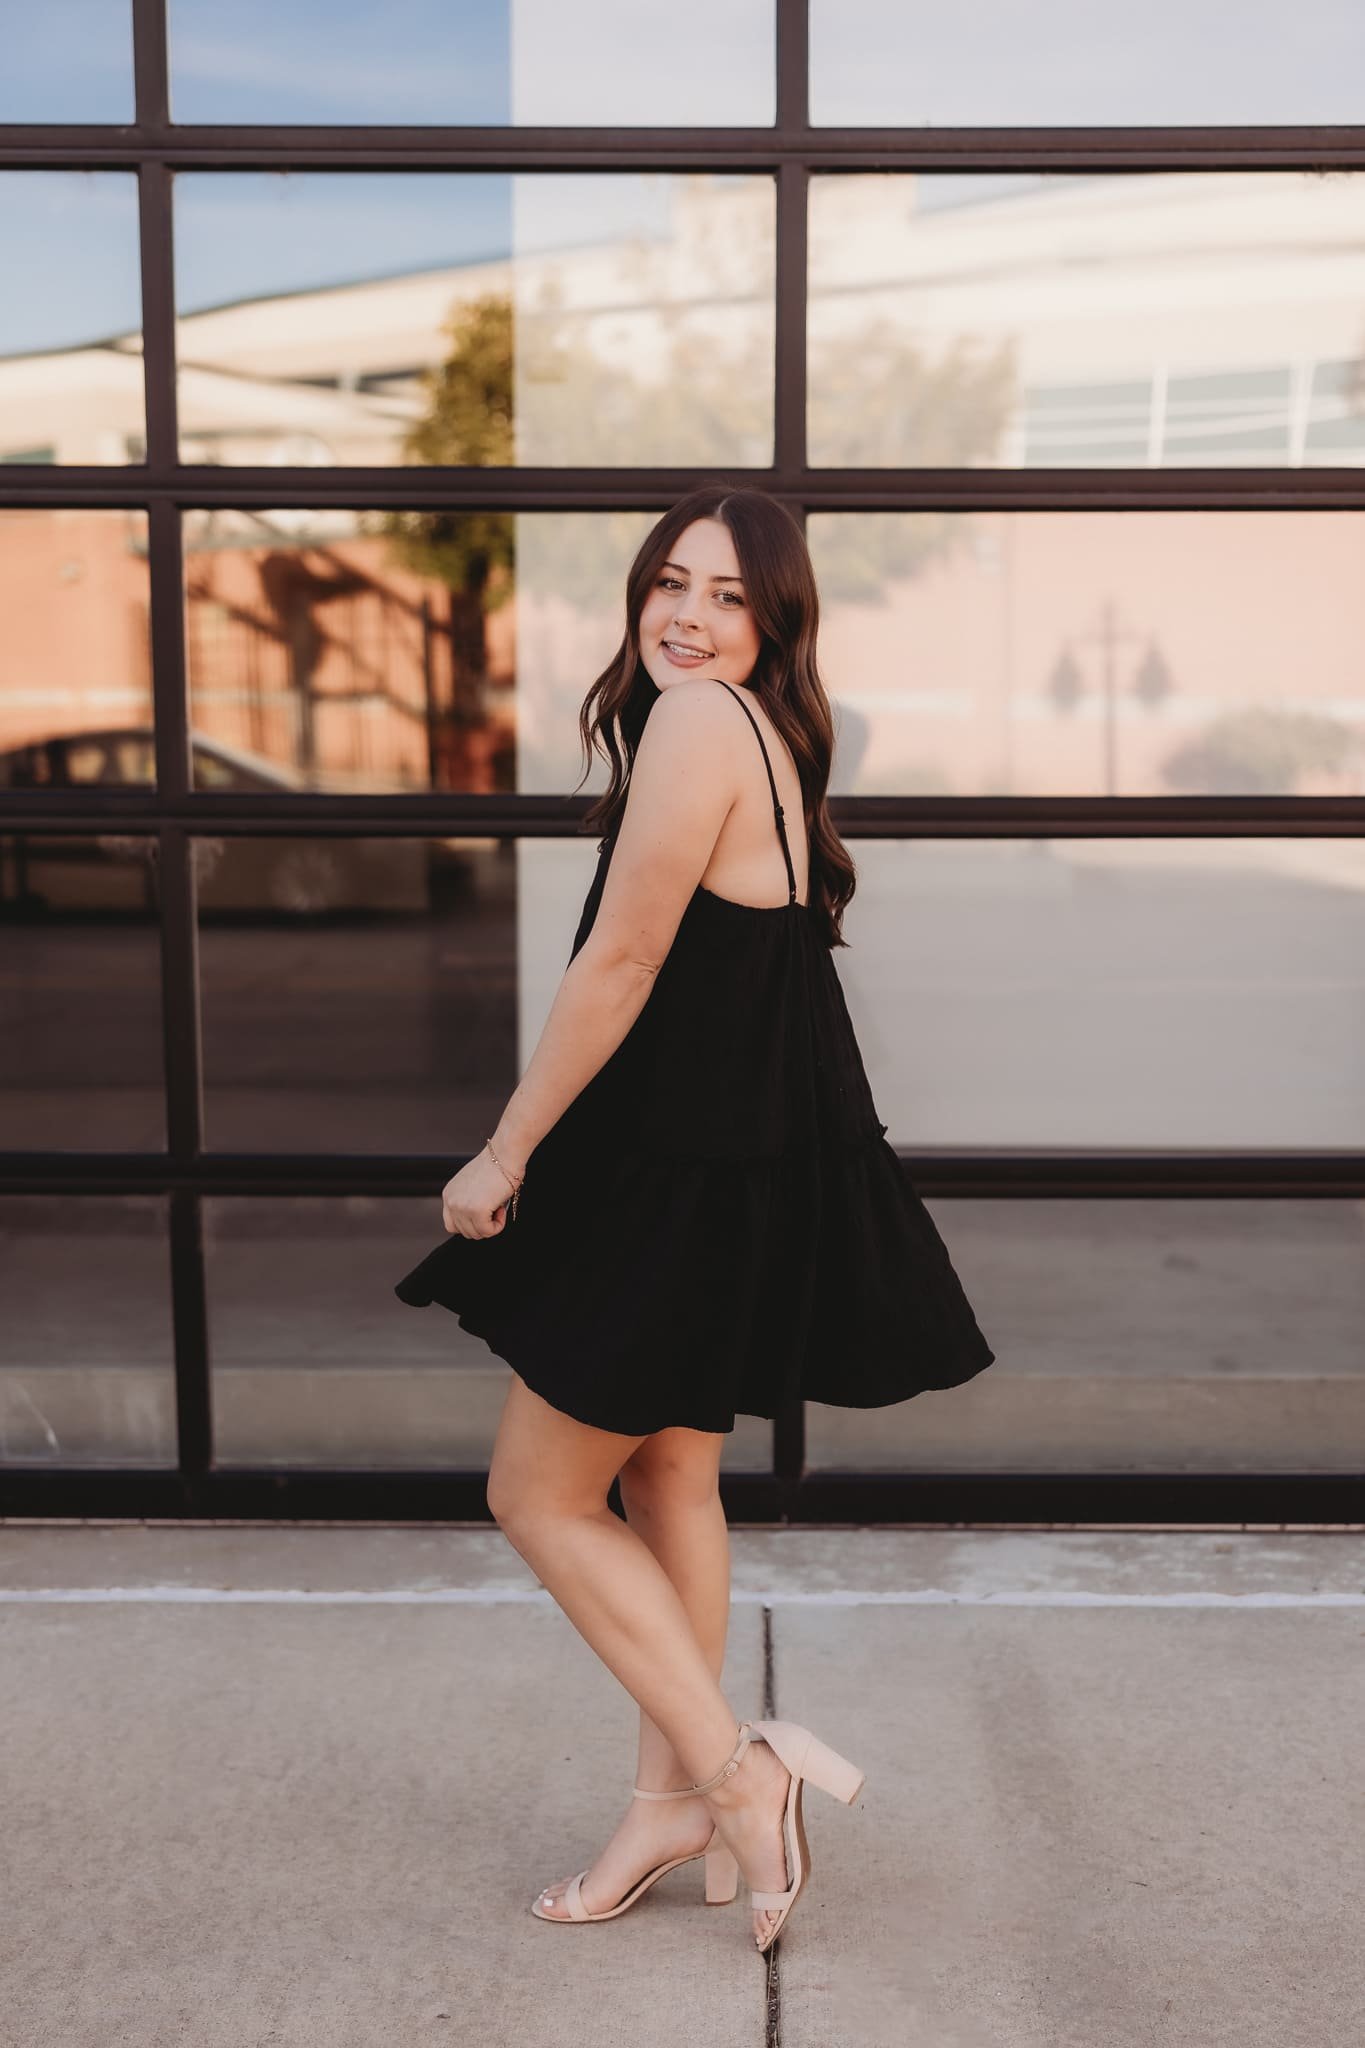  a young woman smiles while spinning in a black dress 